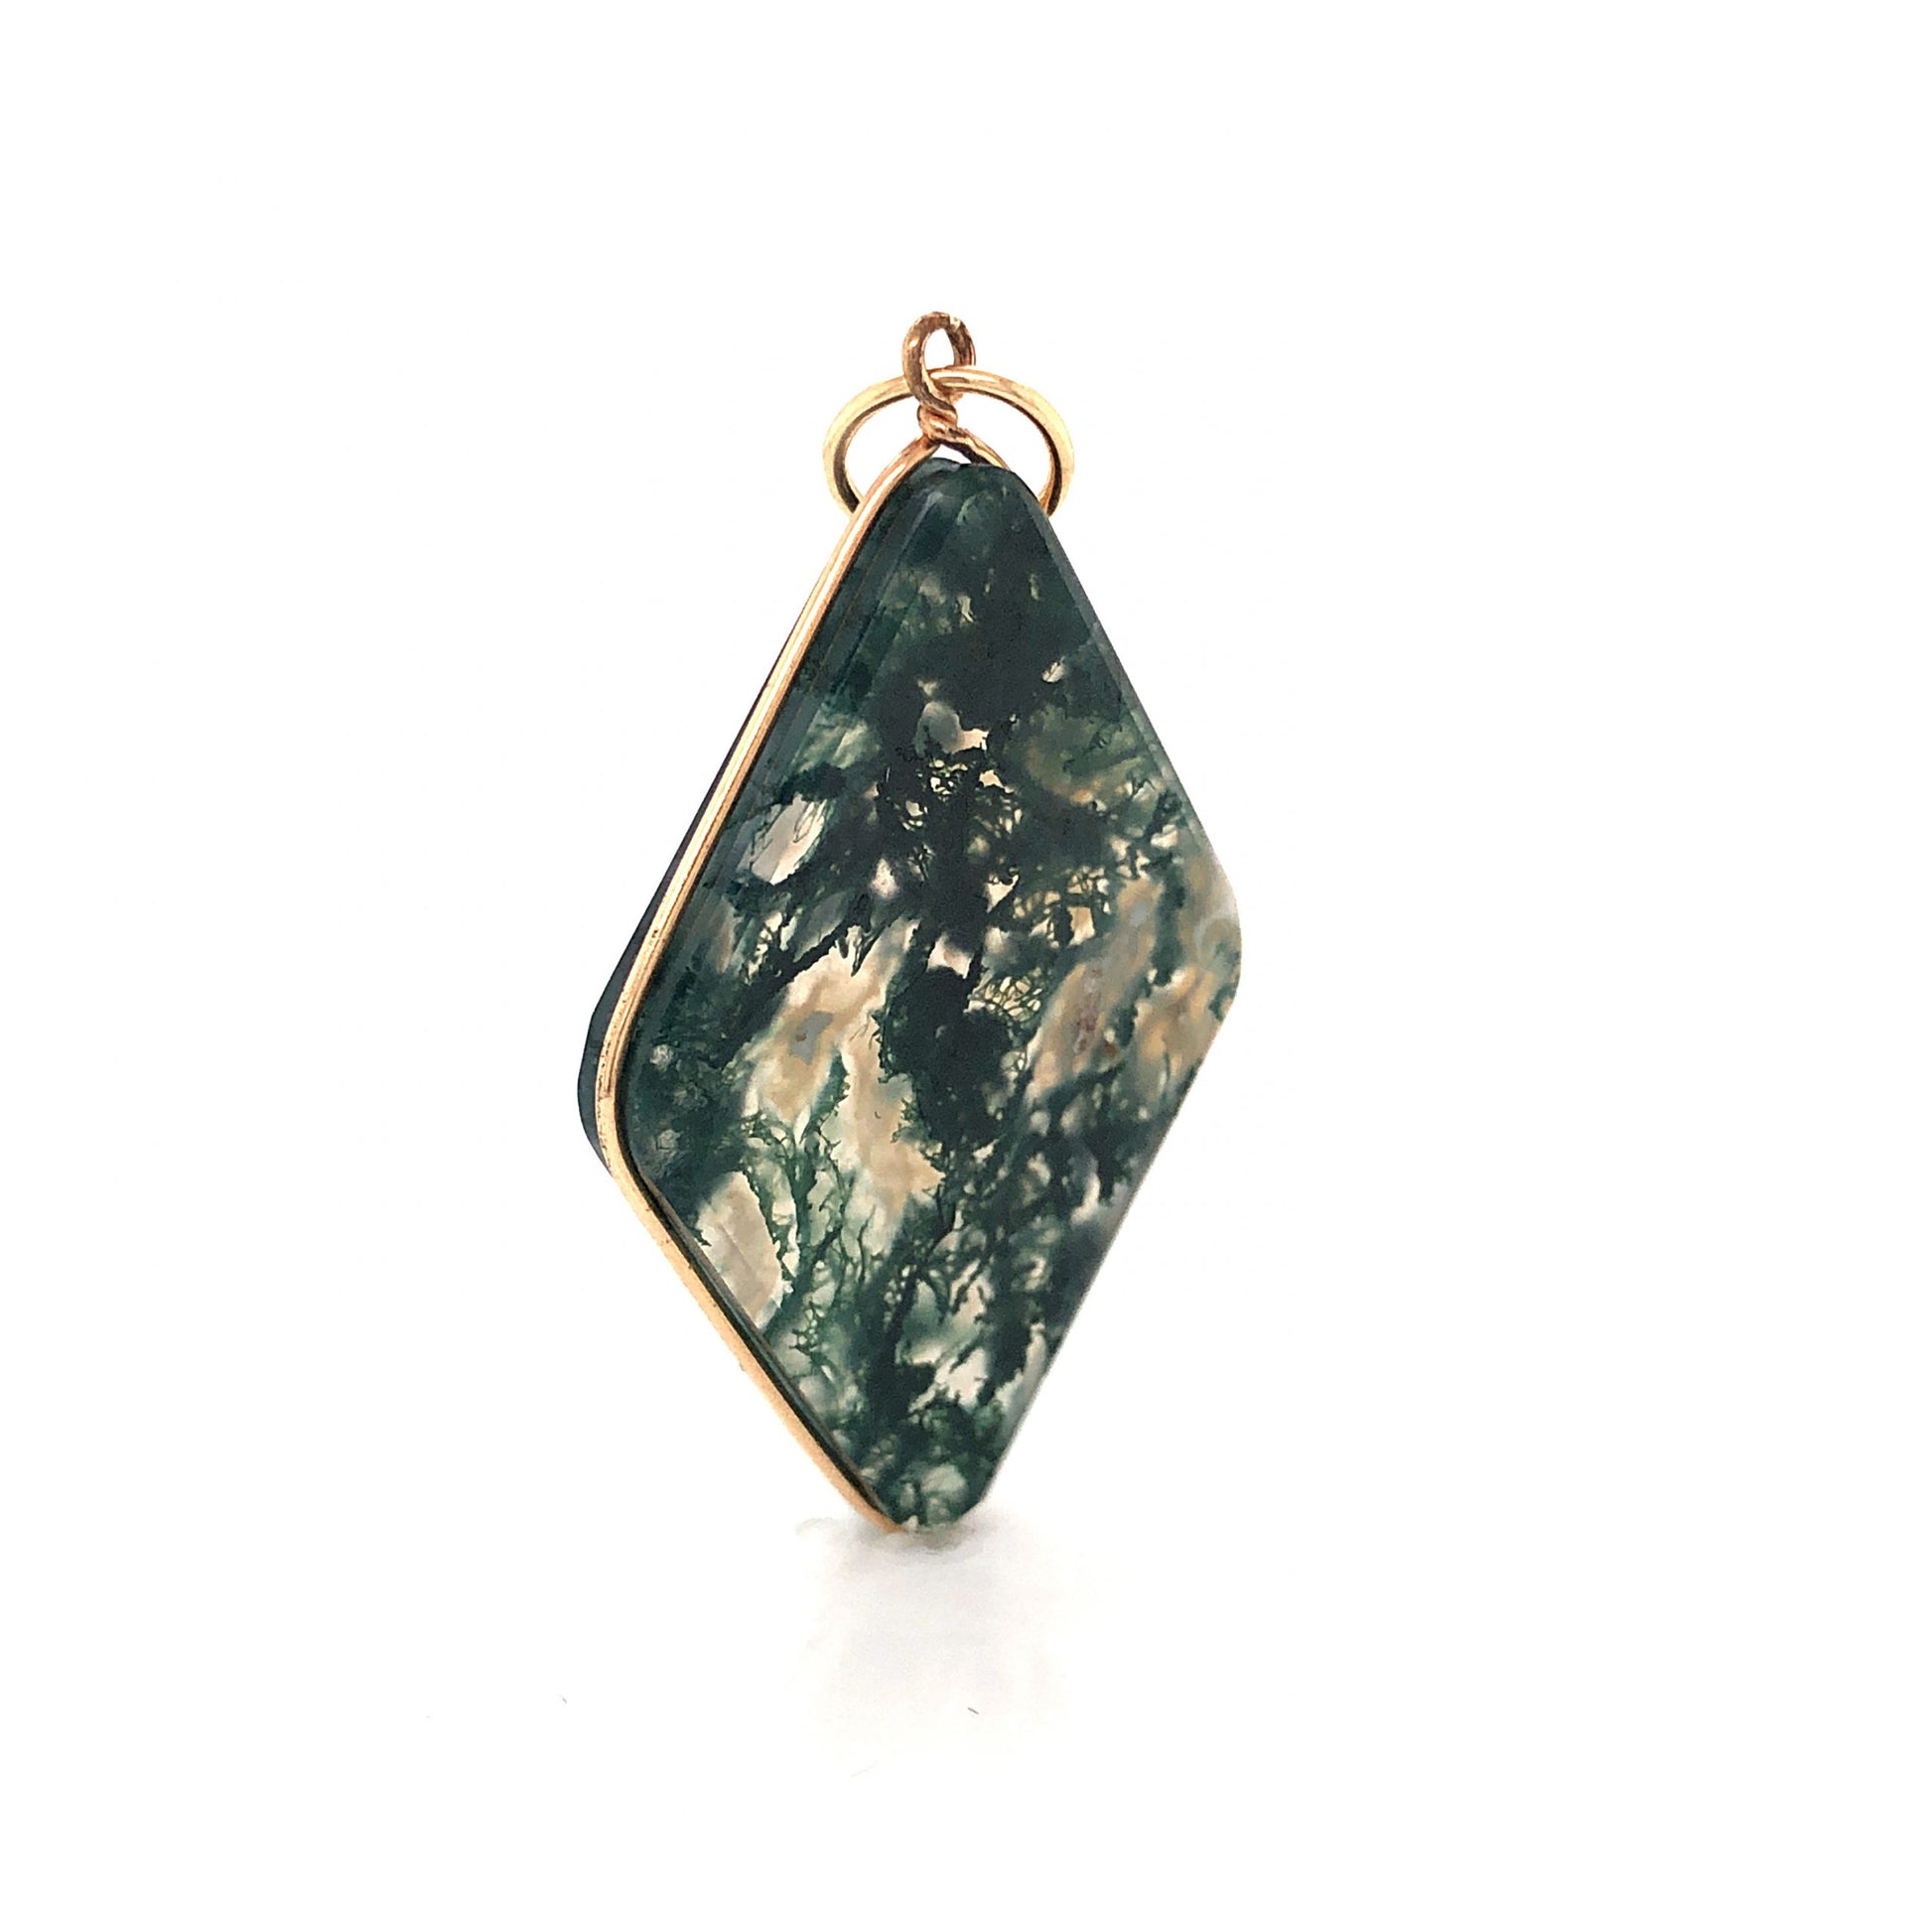 Moss Agate Pendant in 14k Yellow GoldComposition: 14 Karat Yellow Gold Total Gram Weight: 6.9 g